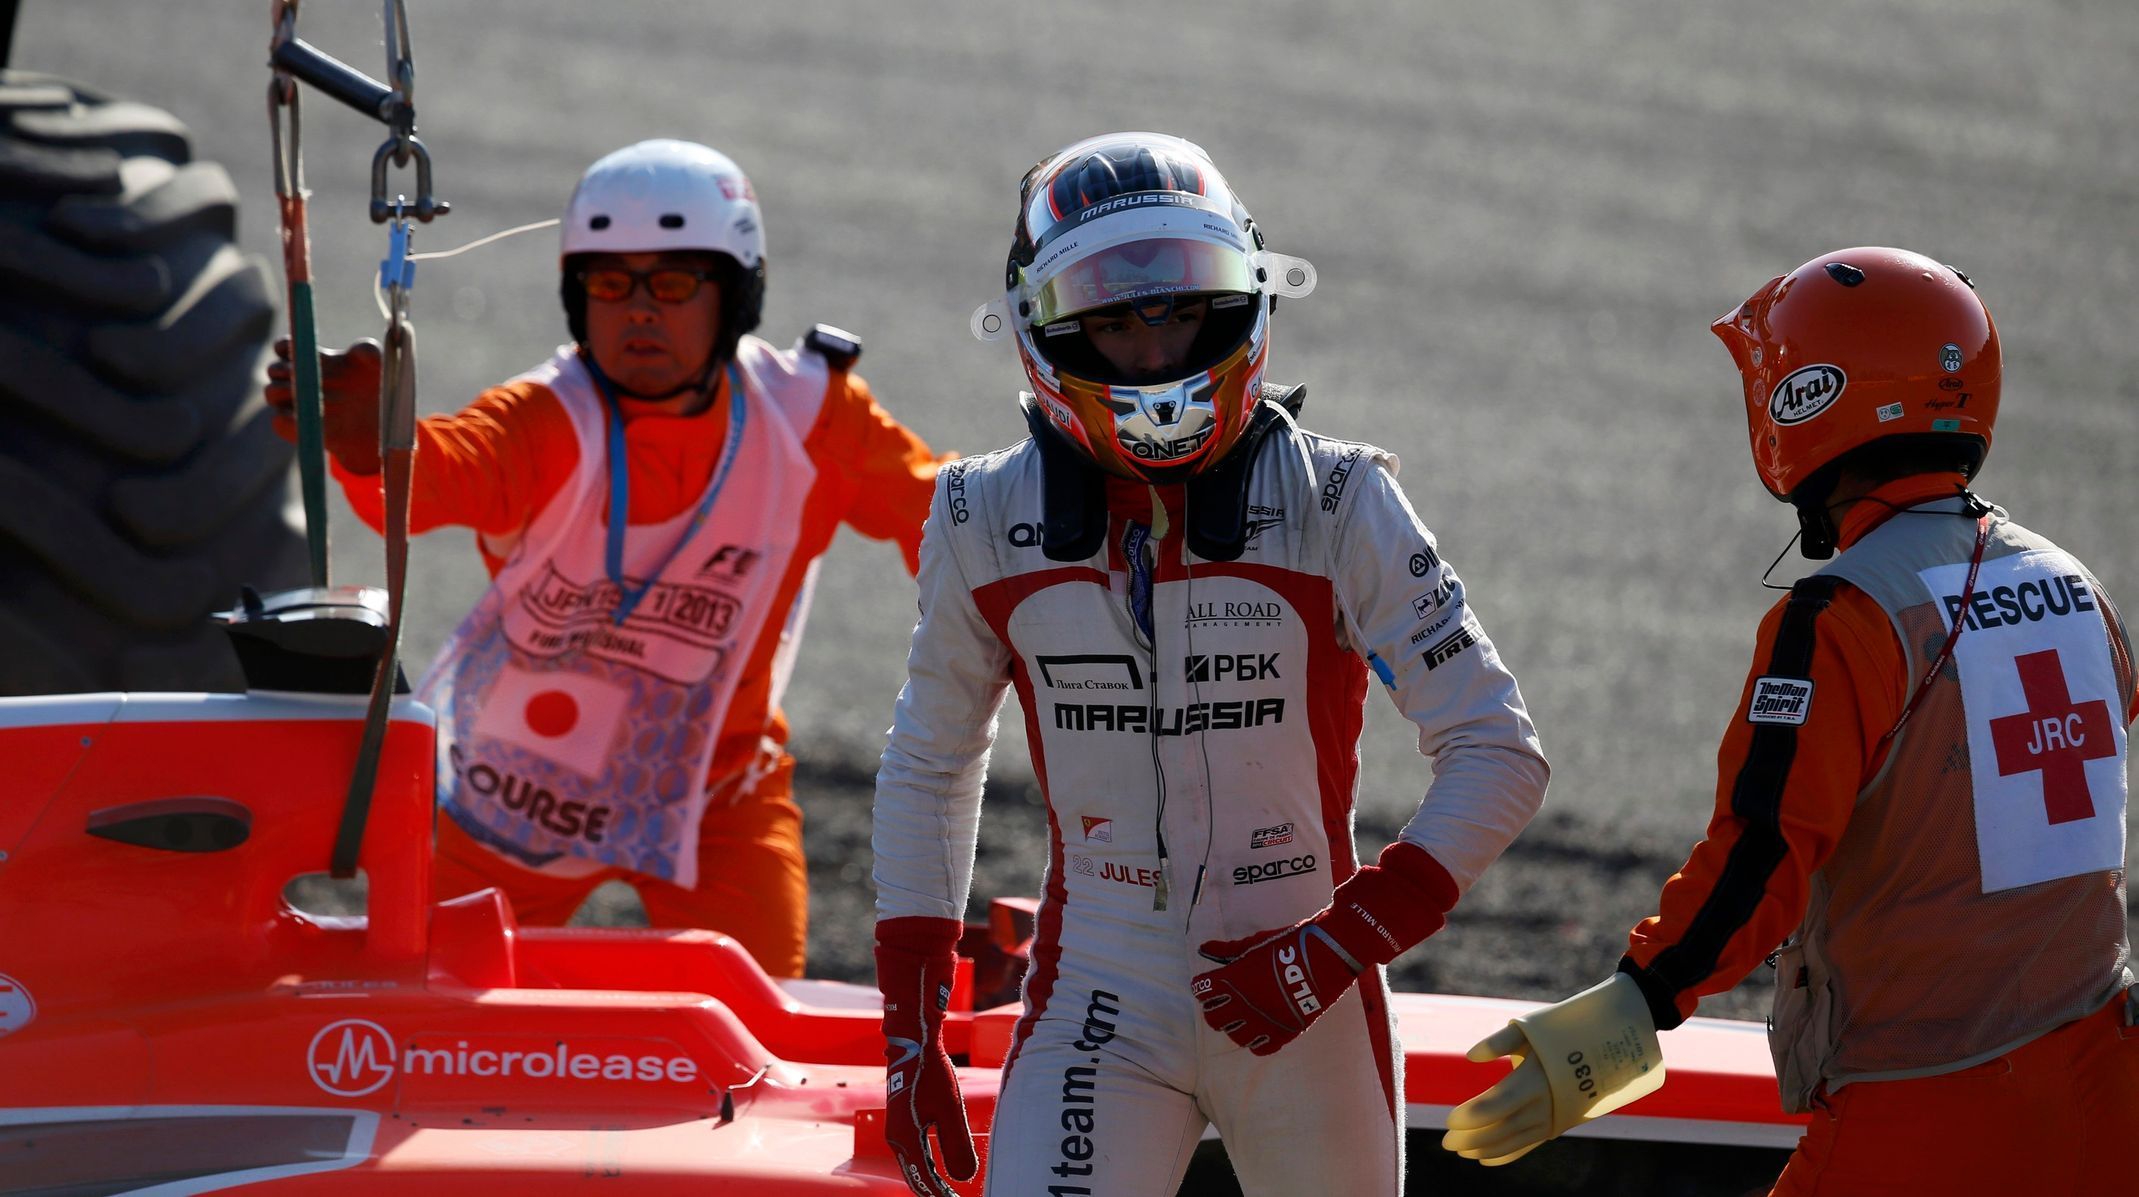 Marussia Formula One driver Bianchi of France walks away from his car during the Japanese F1 Grand Prix at the Suzuka circuit